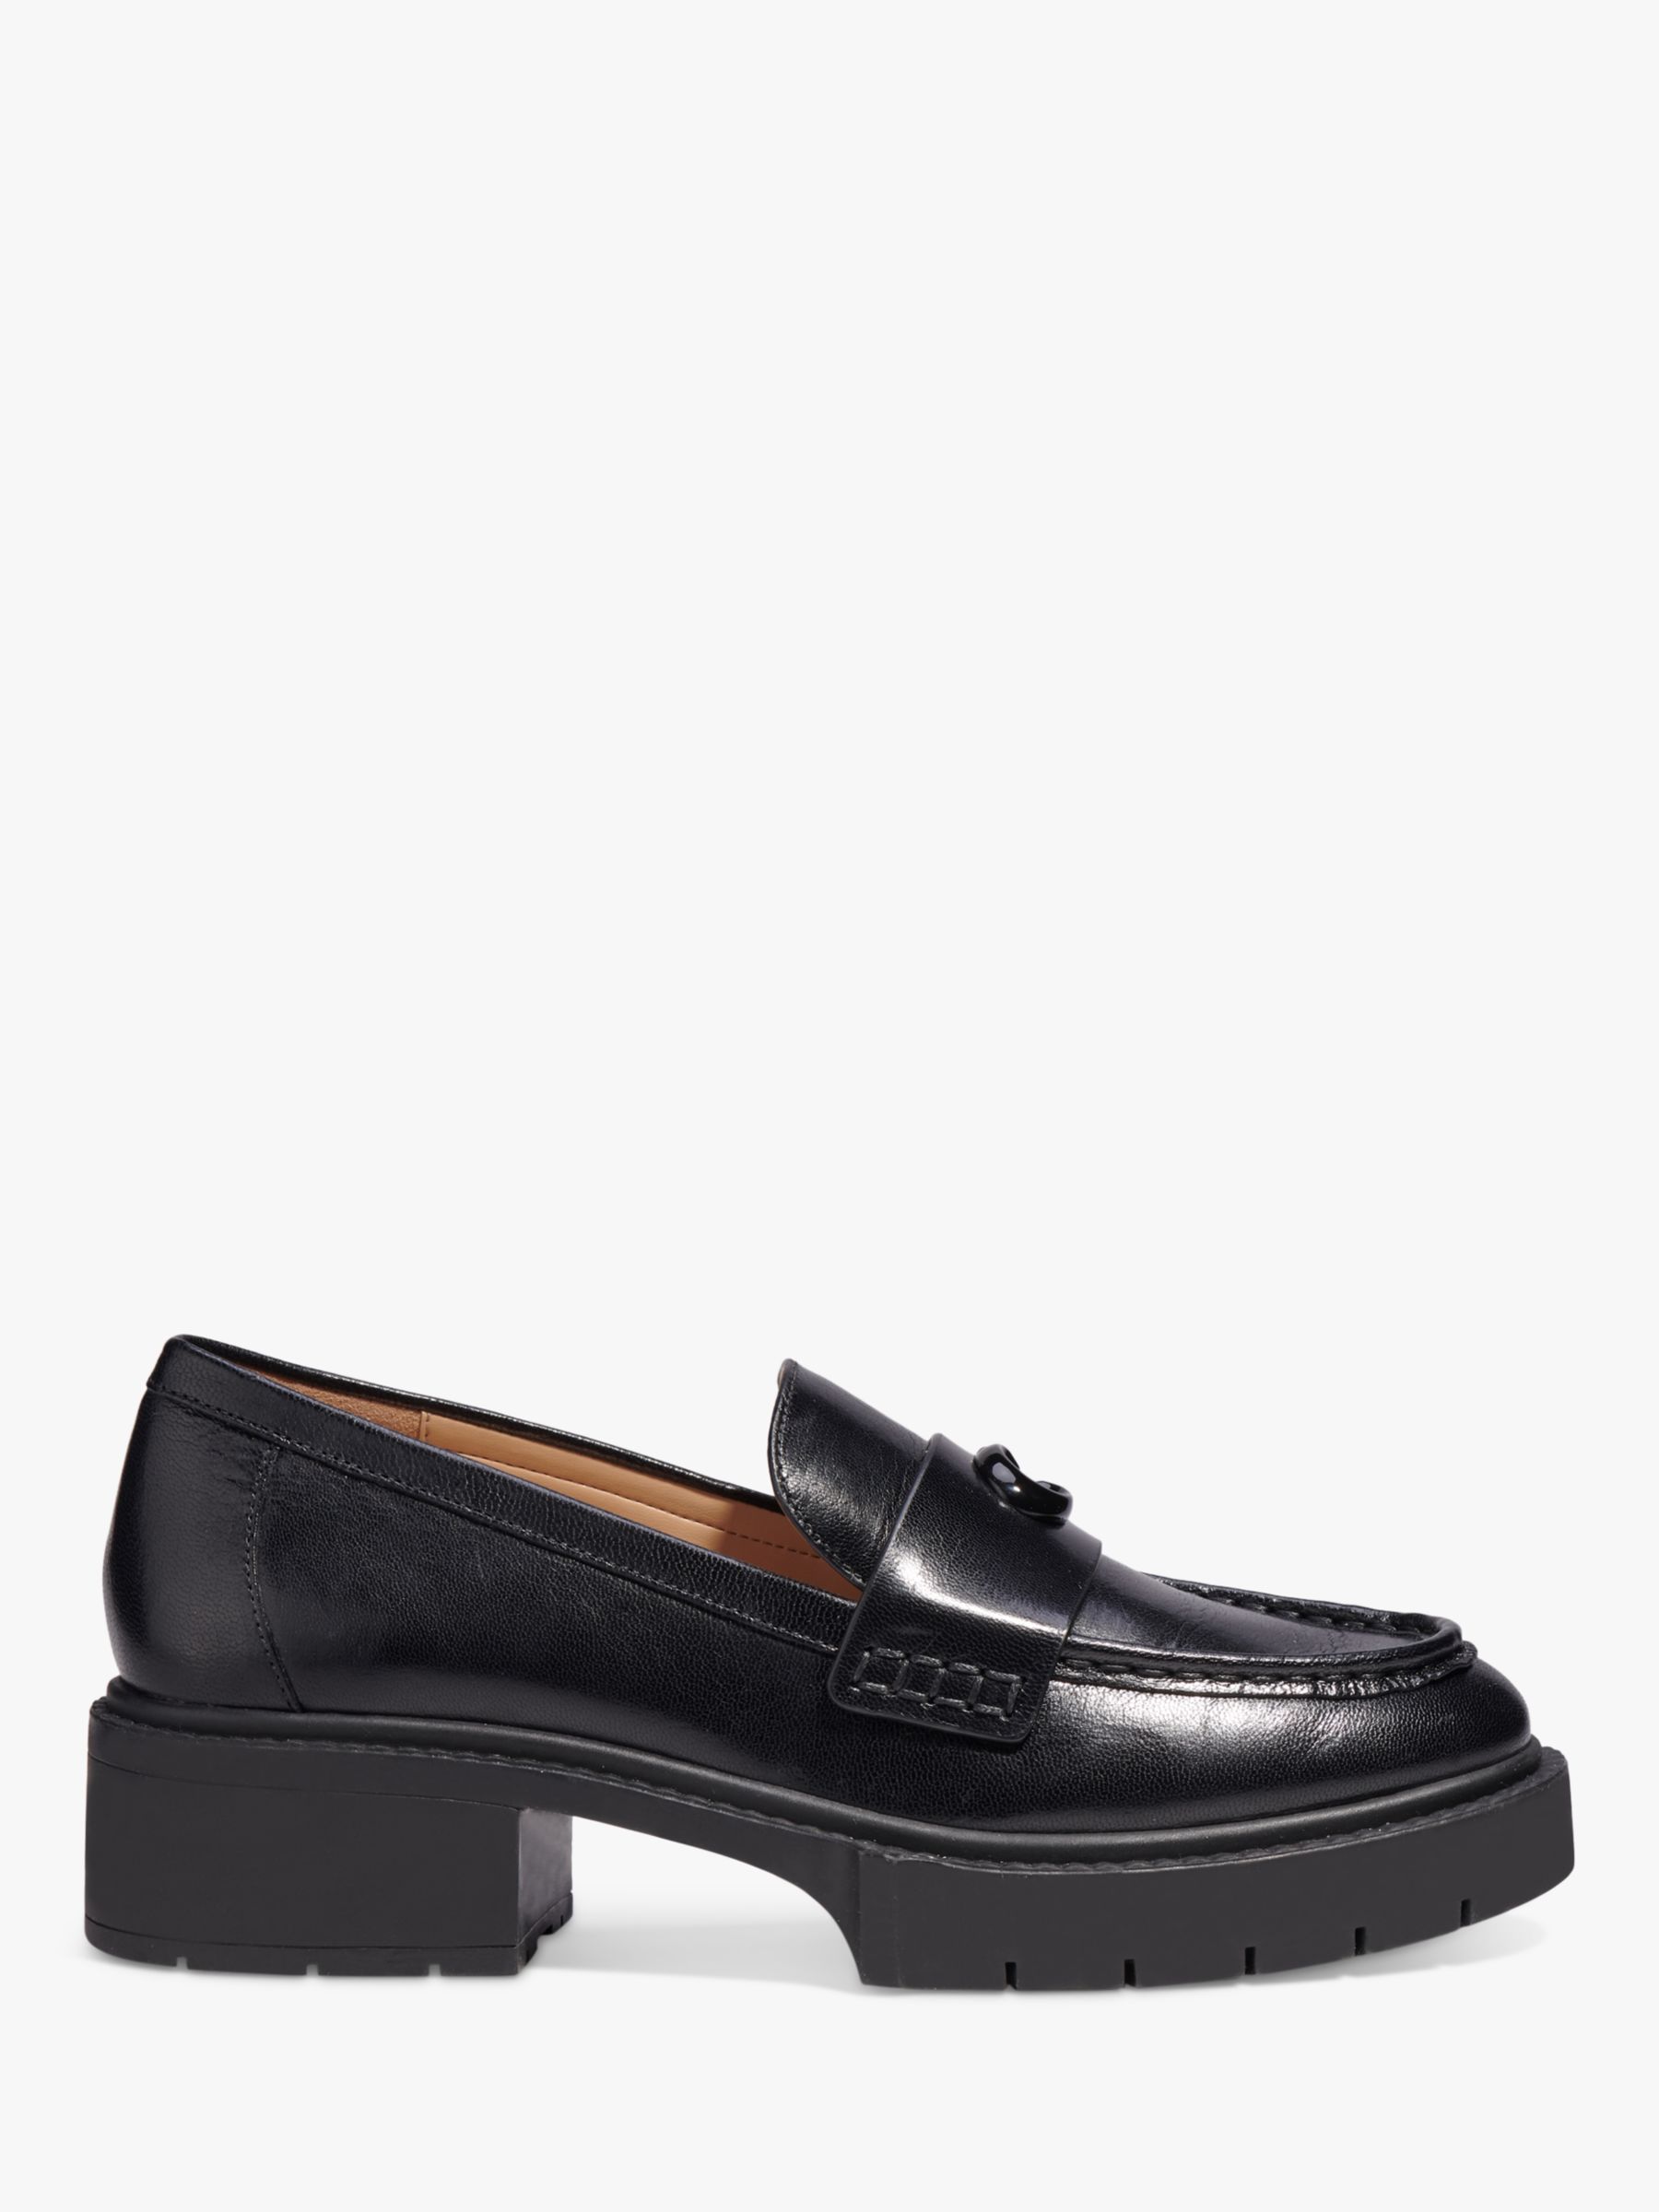 Coach Leah Leather Loafers, Black, 4